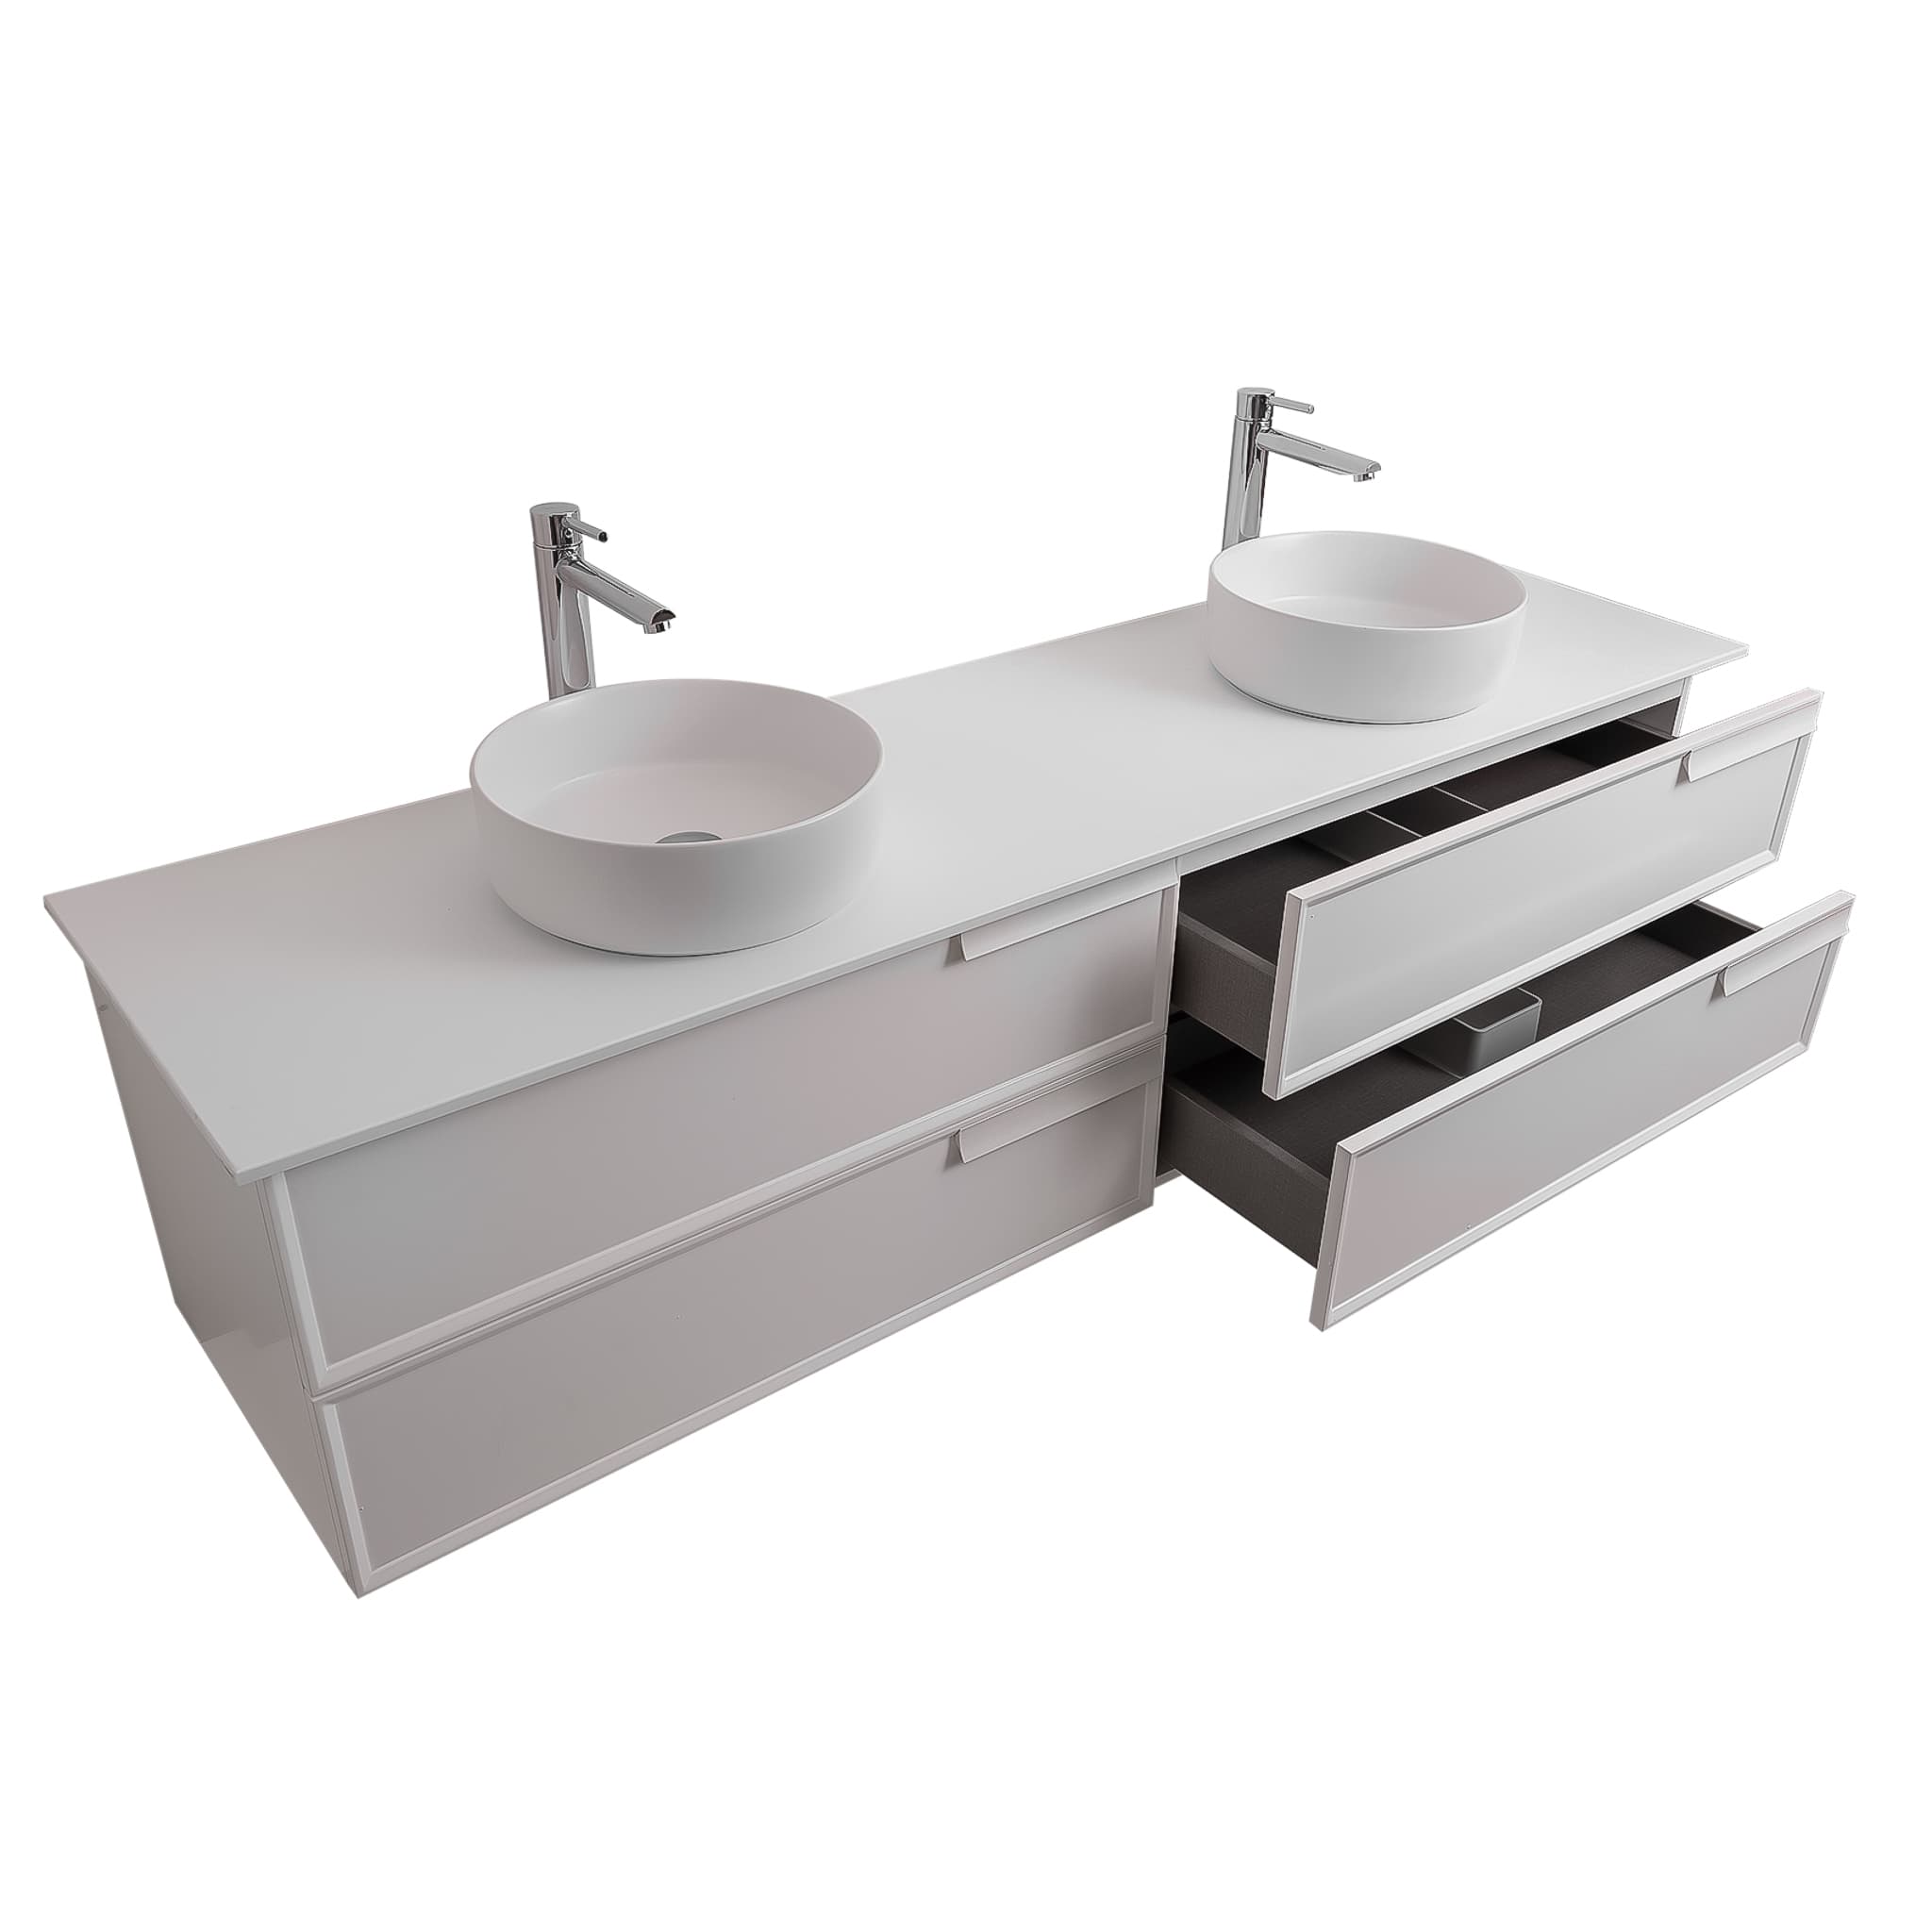 Garda 72 Matte White Cabinet, Ares White Top and Two Ares White Ceramic Basin, Wall Mounted Modern Vanity Set